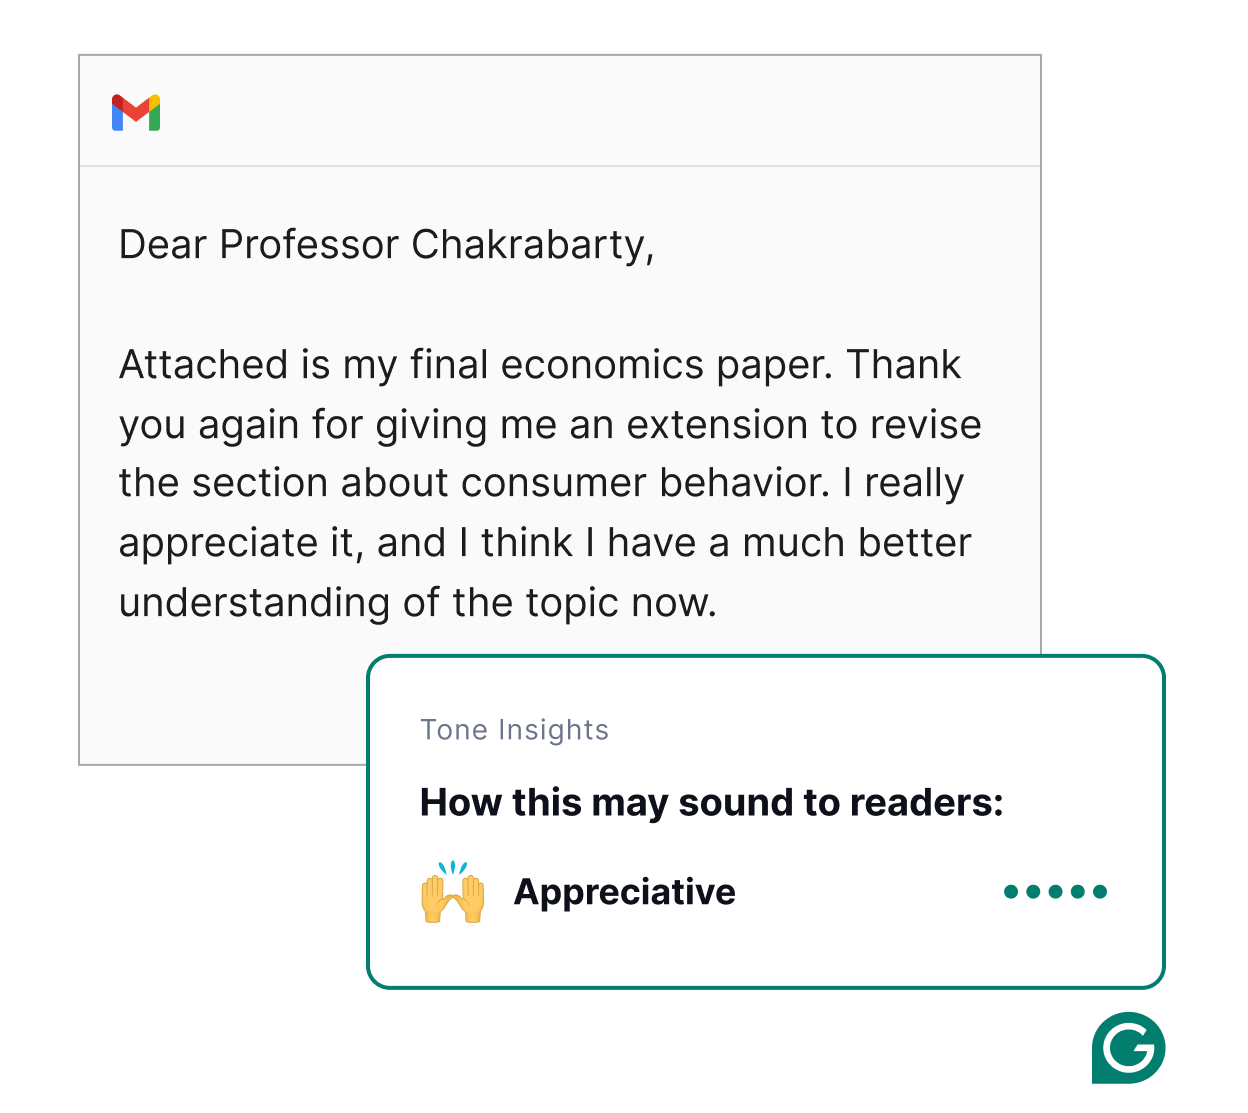 Gmail to a professor with Grammarly showing the tone of the email